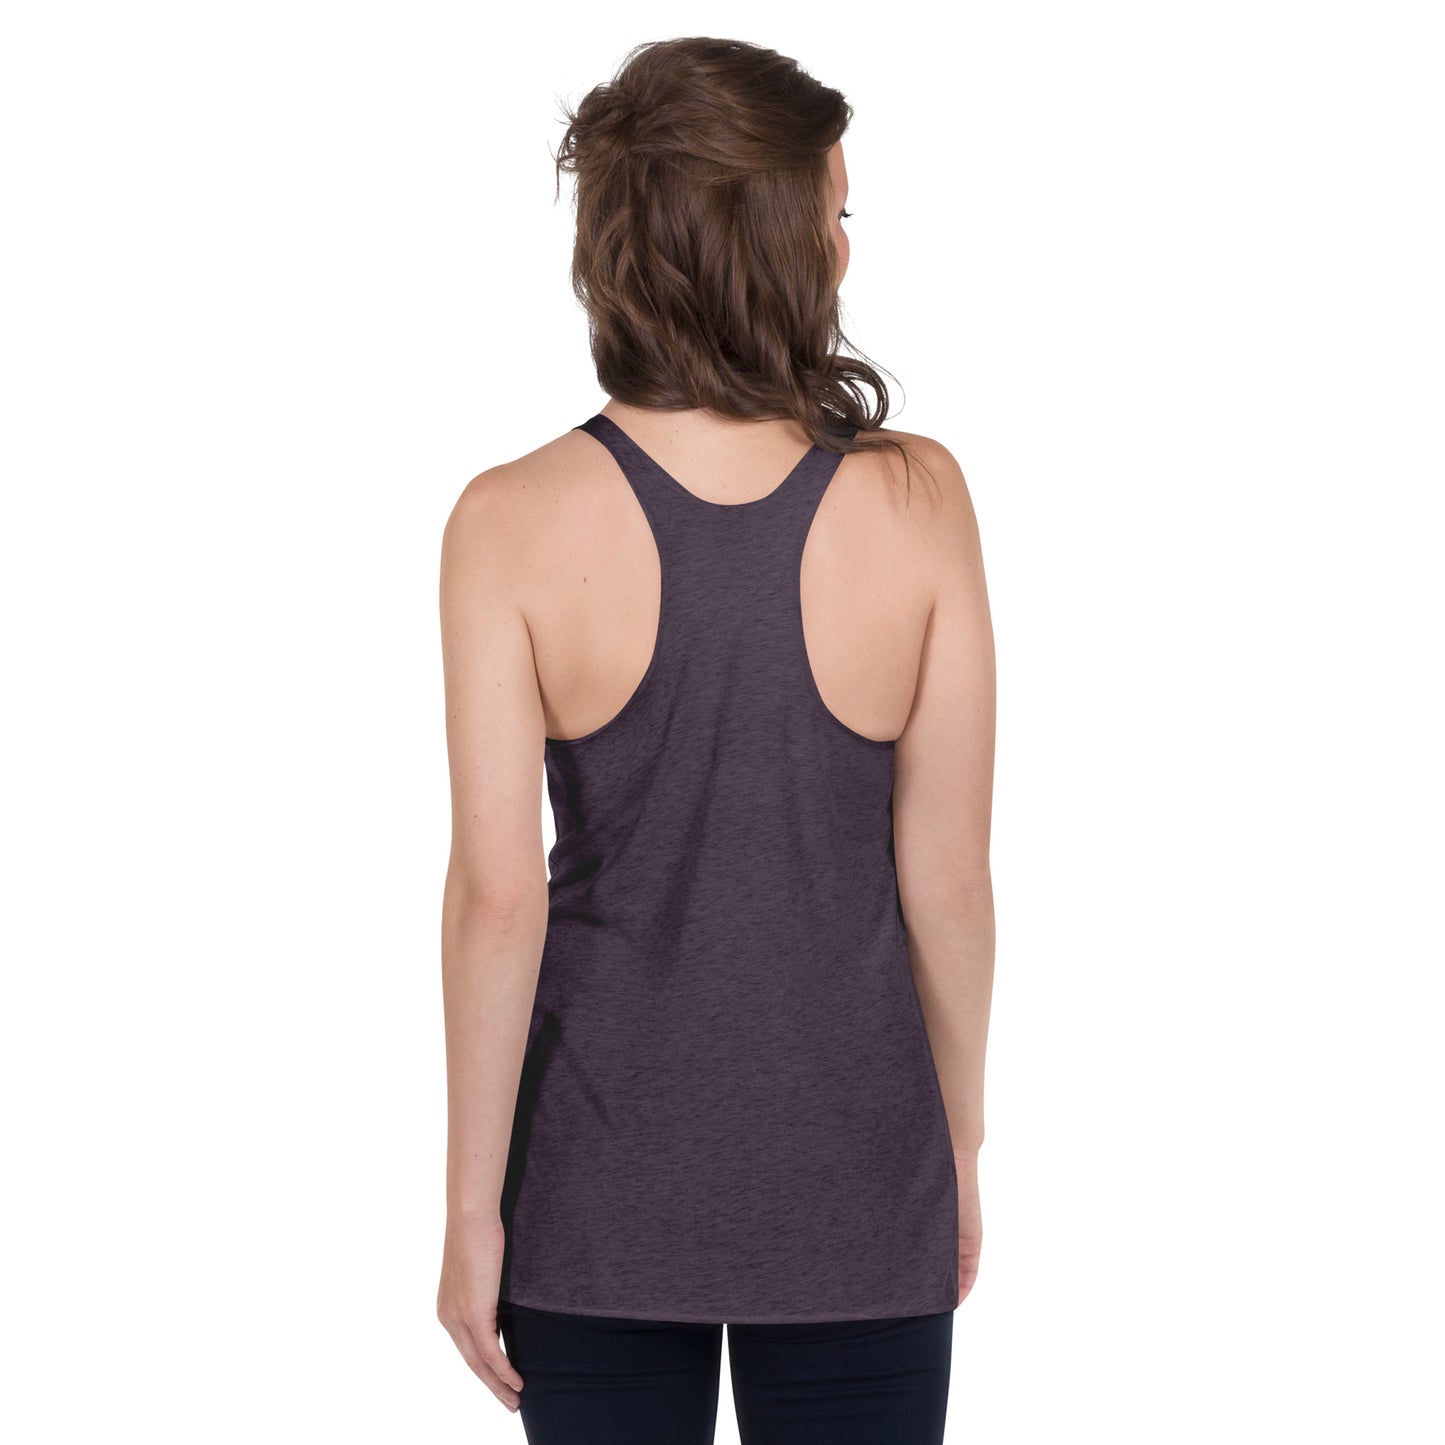 A Friend Loves At All Times Women's Racerback Tank